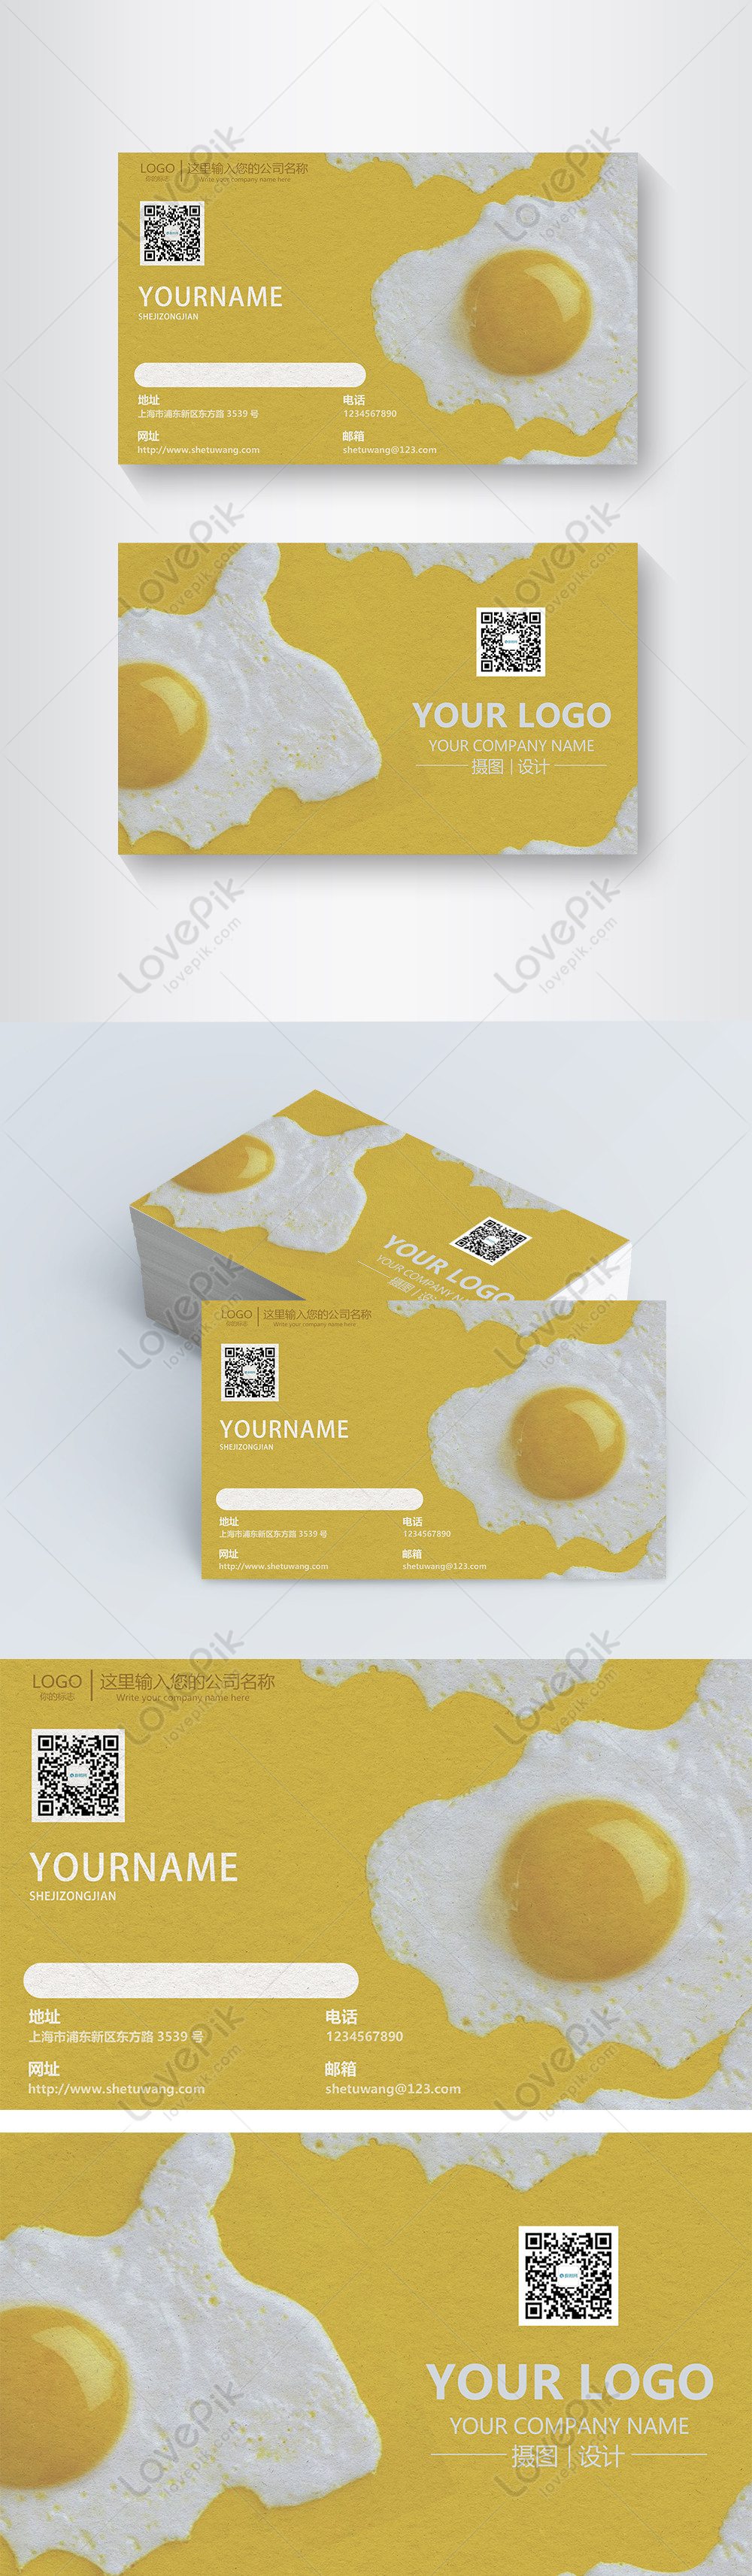 Download Business Card Of Creative Yellow Fried Egg Template Image Picture Free Download 400139752 Lovepik Com PSD Mockup Templates